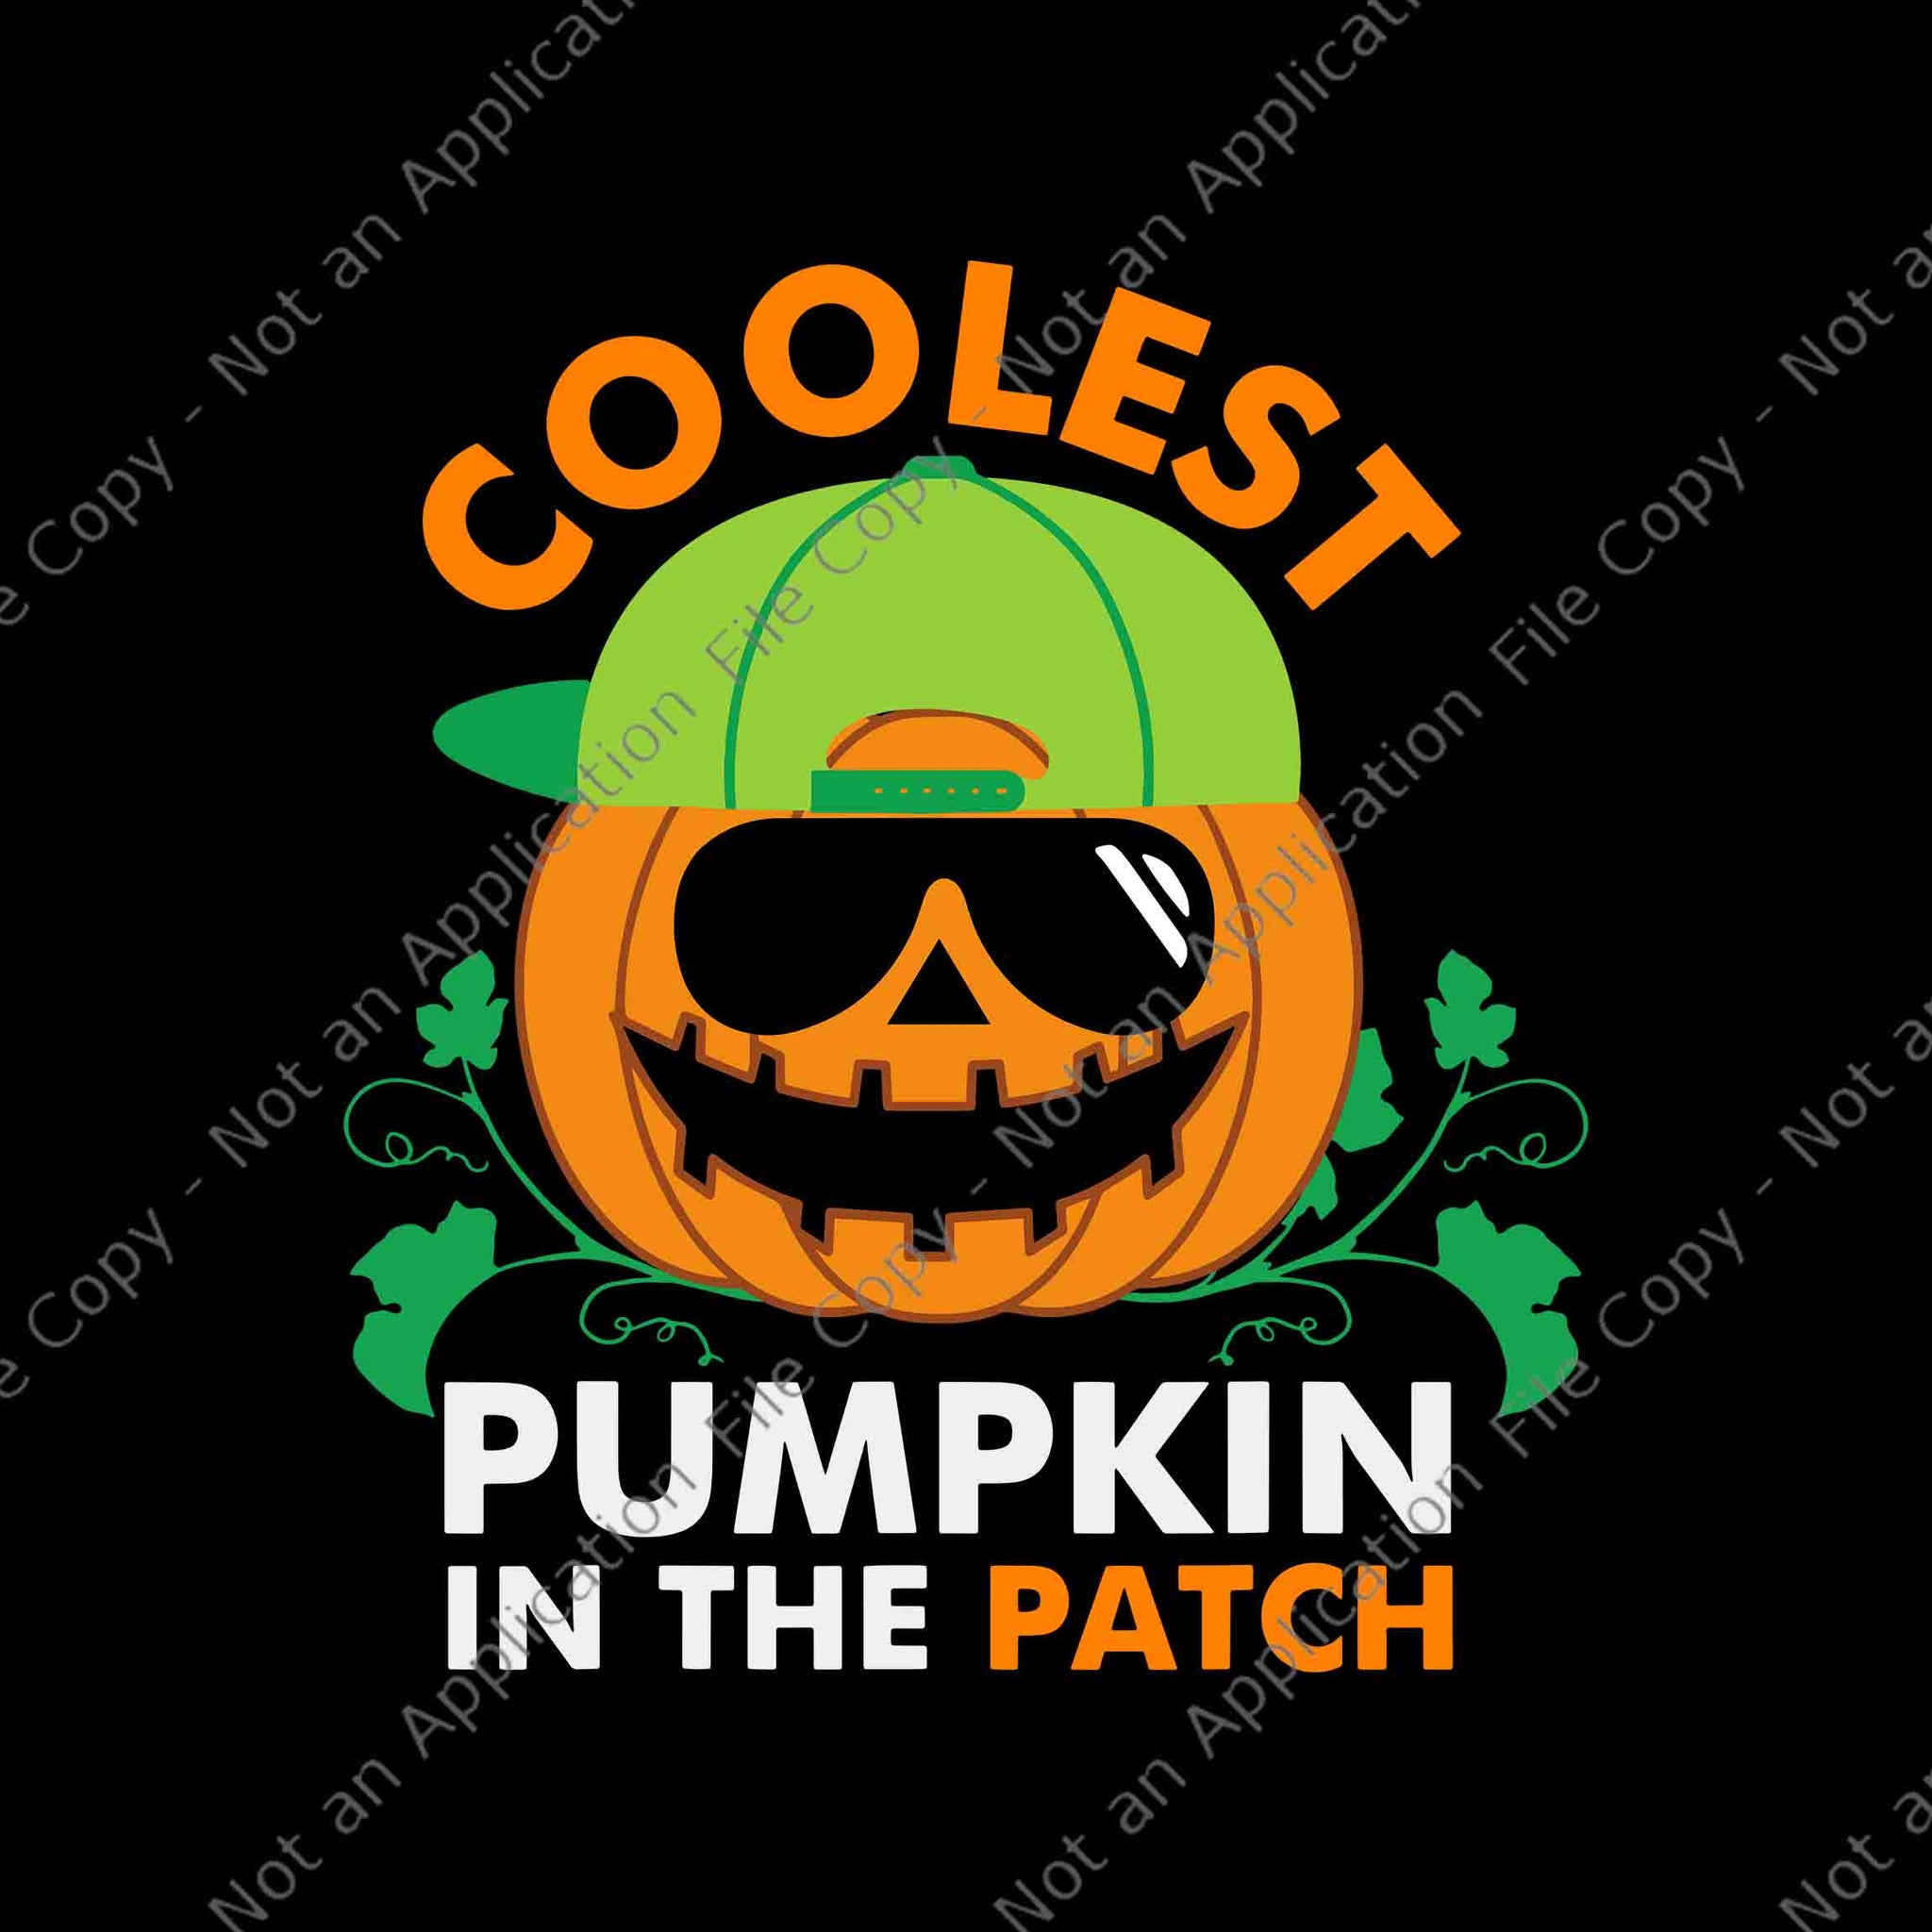 Coolest Pumpkin In The Patch Halloween Svg, Coolest Pumpkin Svg, Pumpkin Svg, Halloween Svg